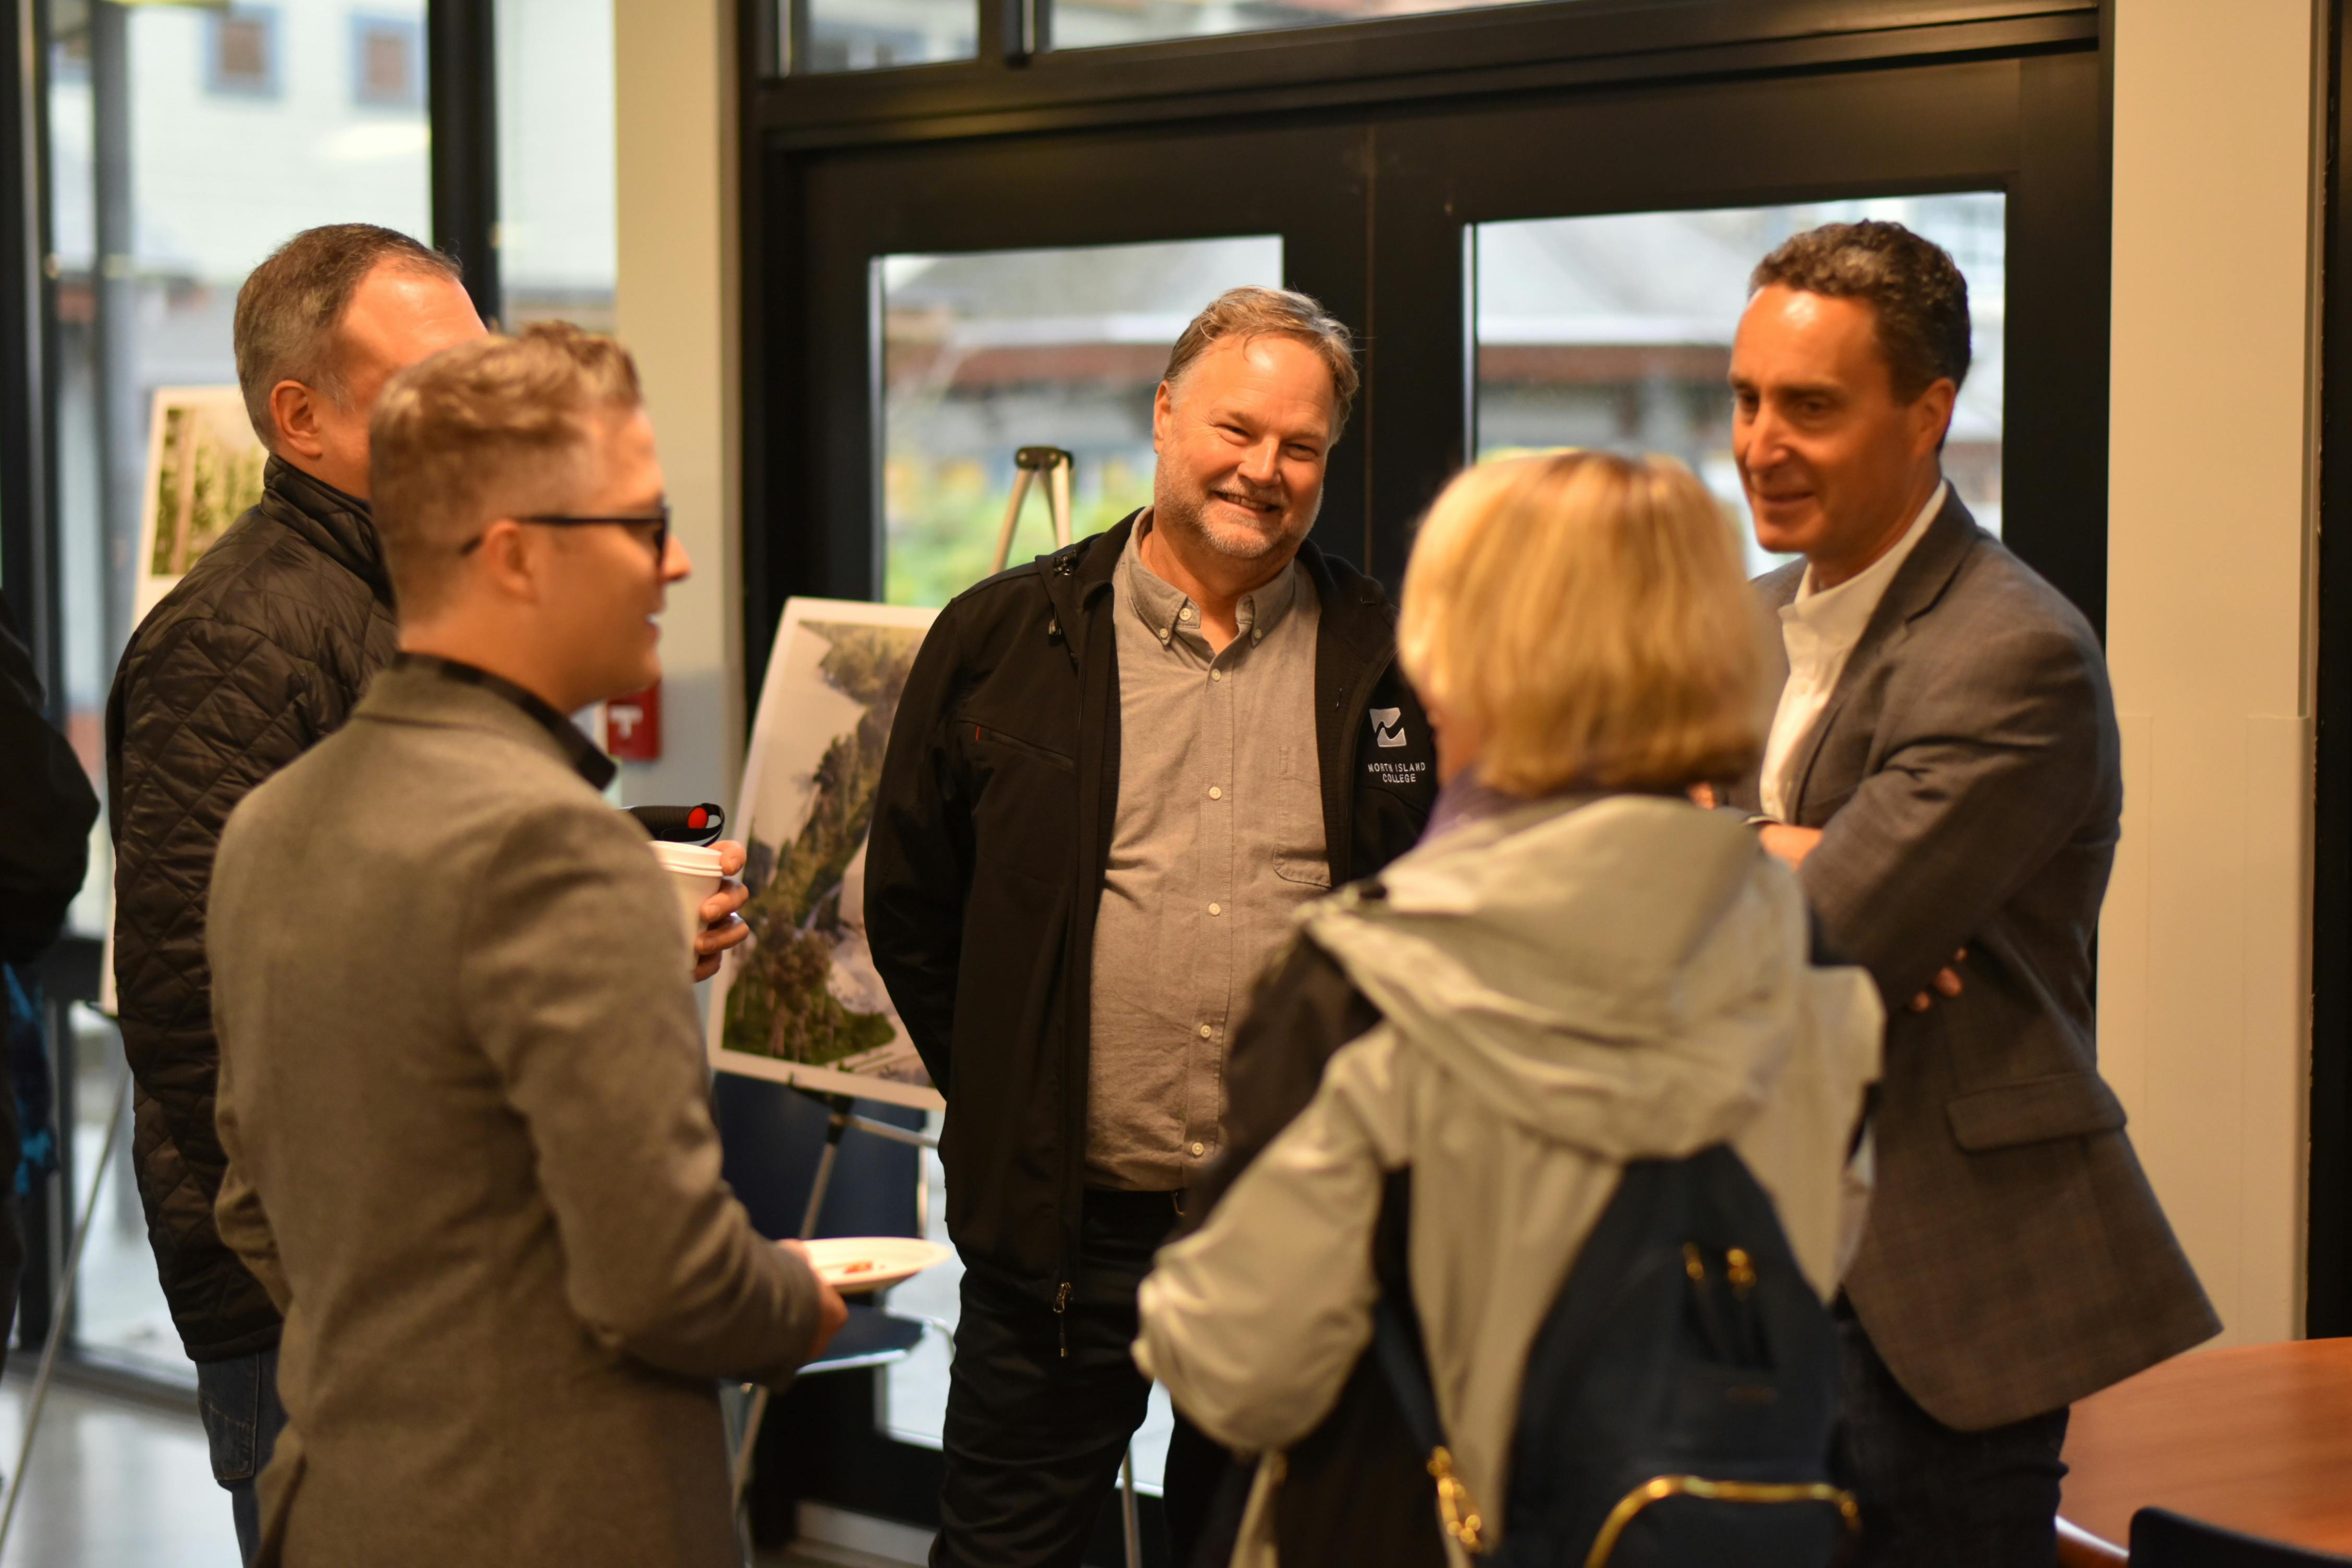 Chris Udy (centre), NIC Director of Capital Projects, and Allan Beron, President, Urban One, talk to people after the blessing.